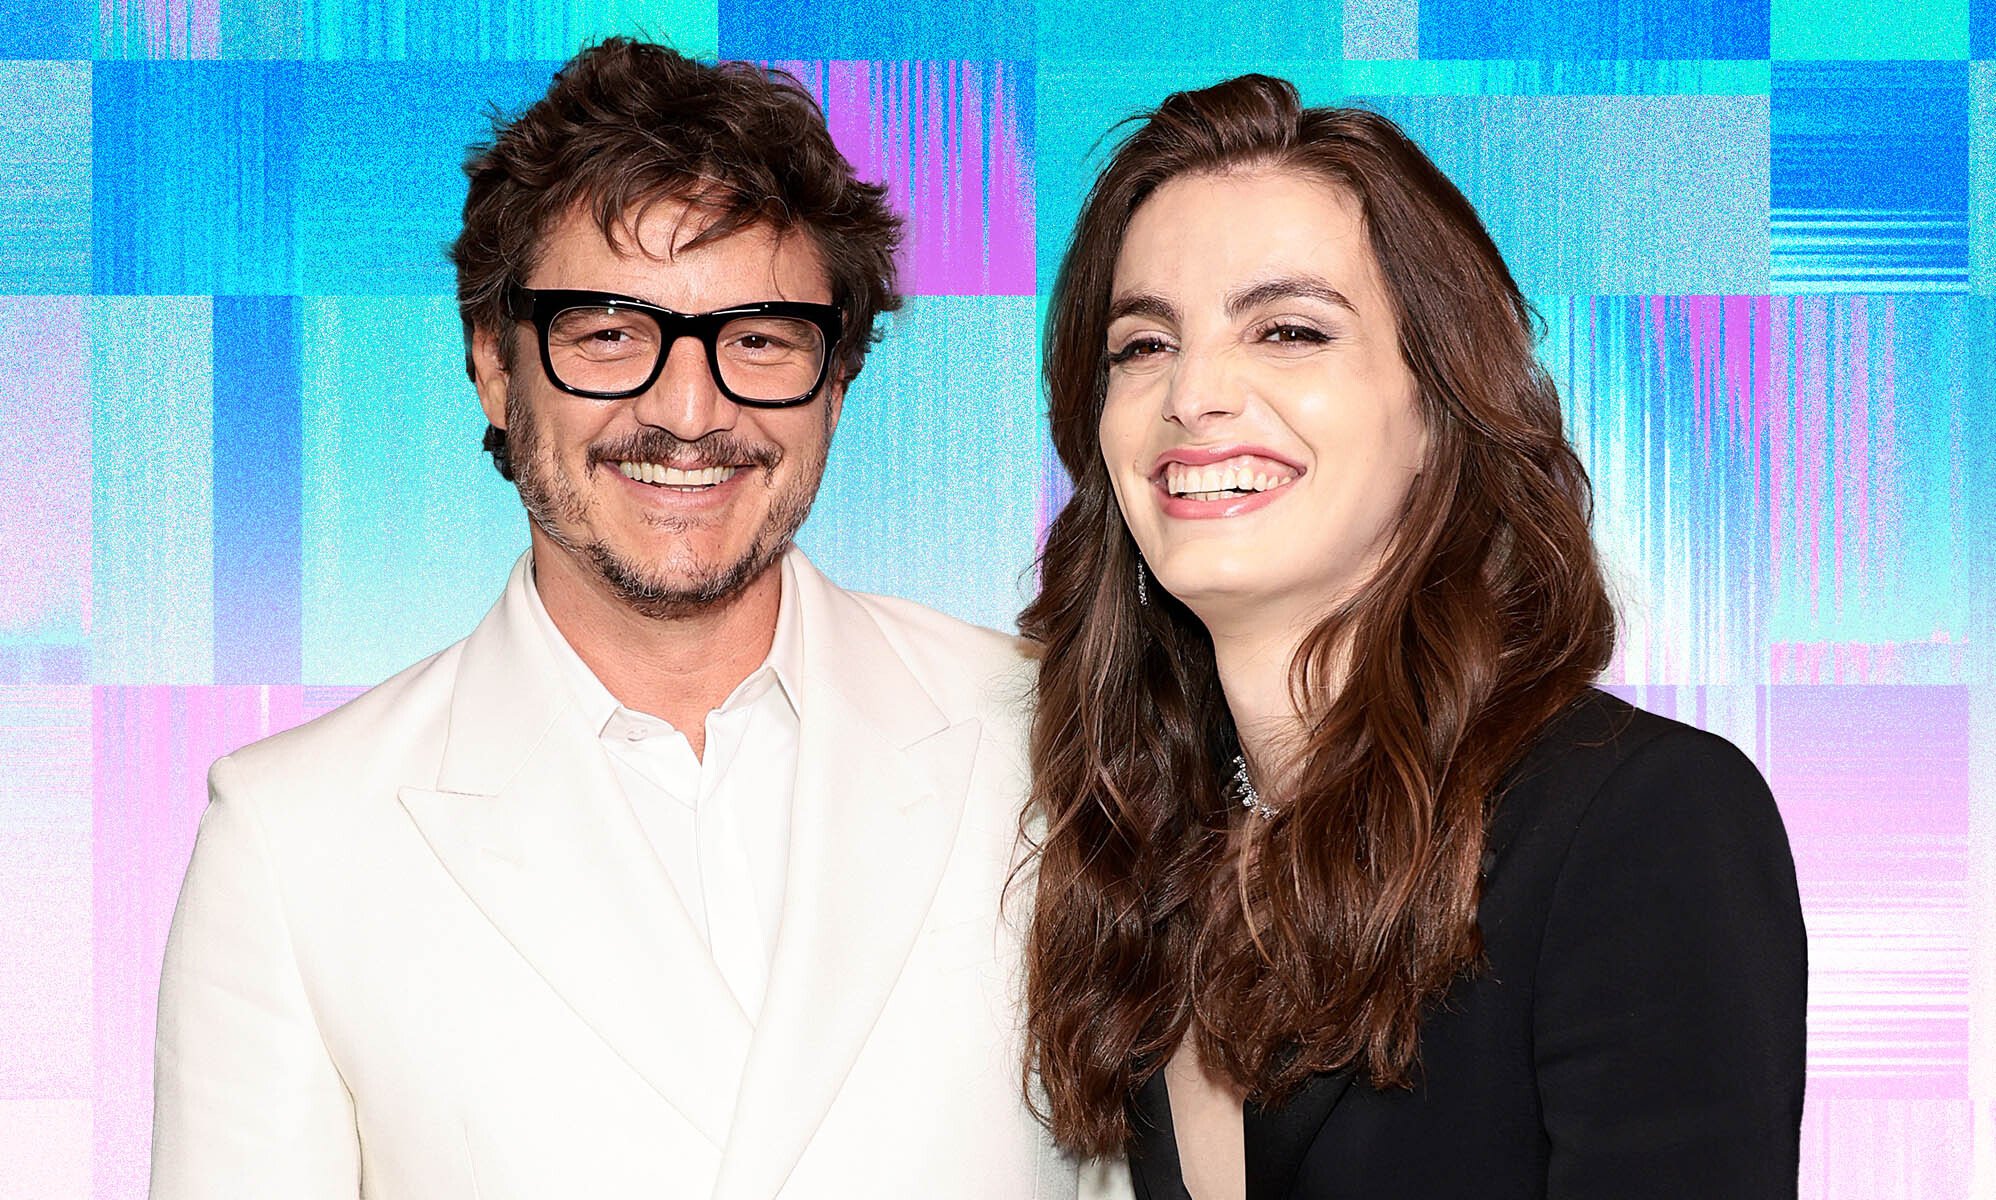 Pedro Pascal is not only the internet’s ‘daddy’ – he’s also an amazing ally to his trans sister